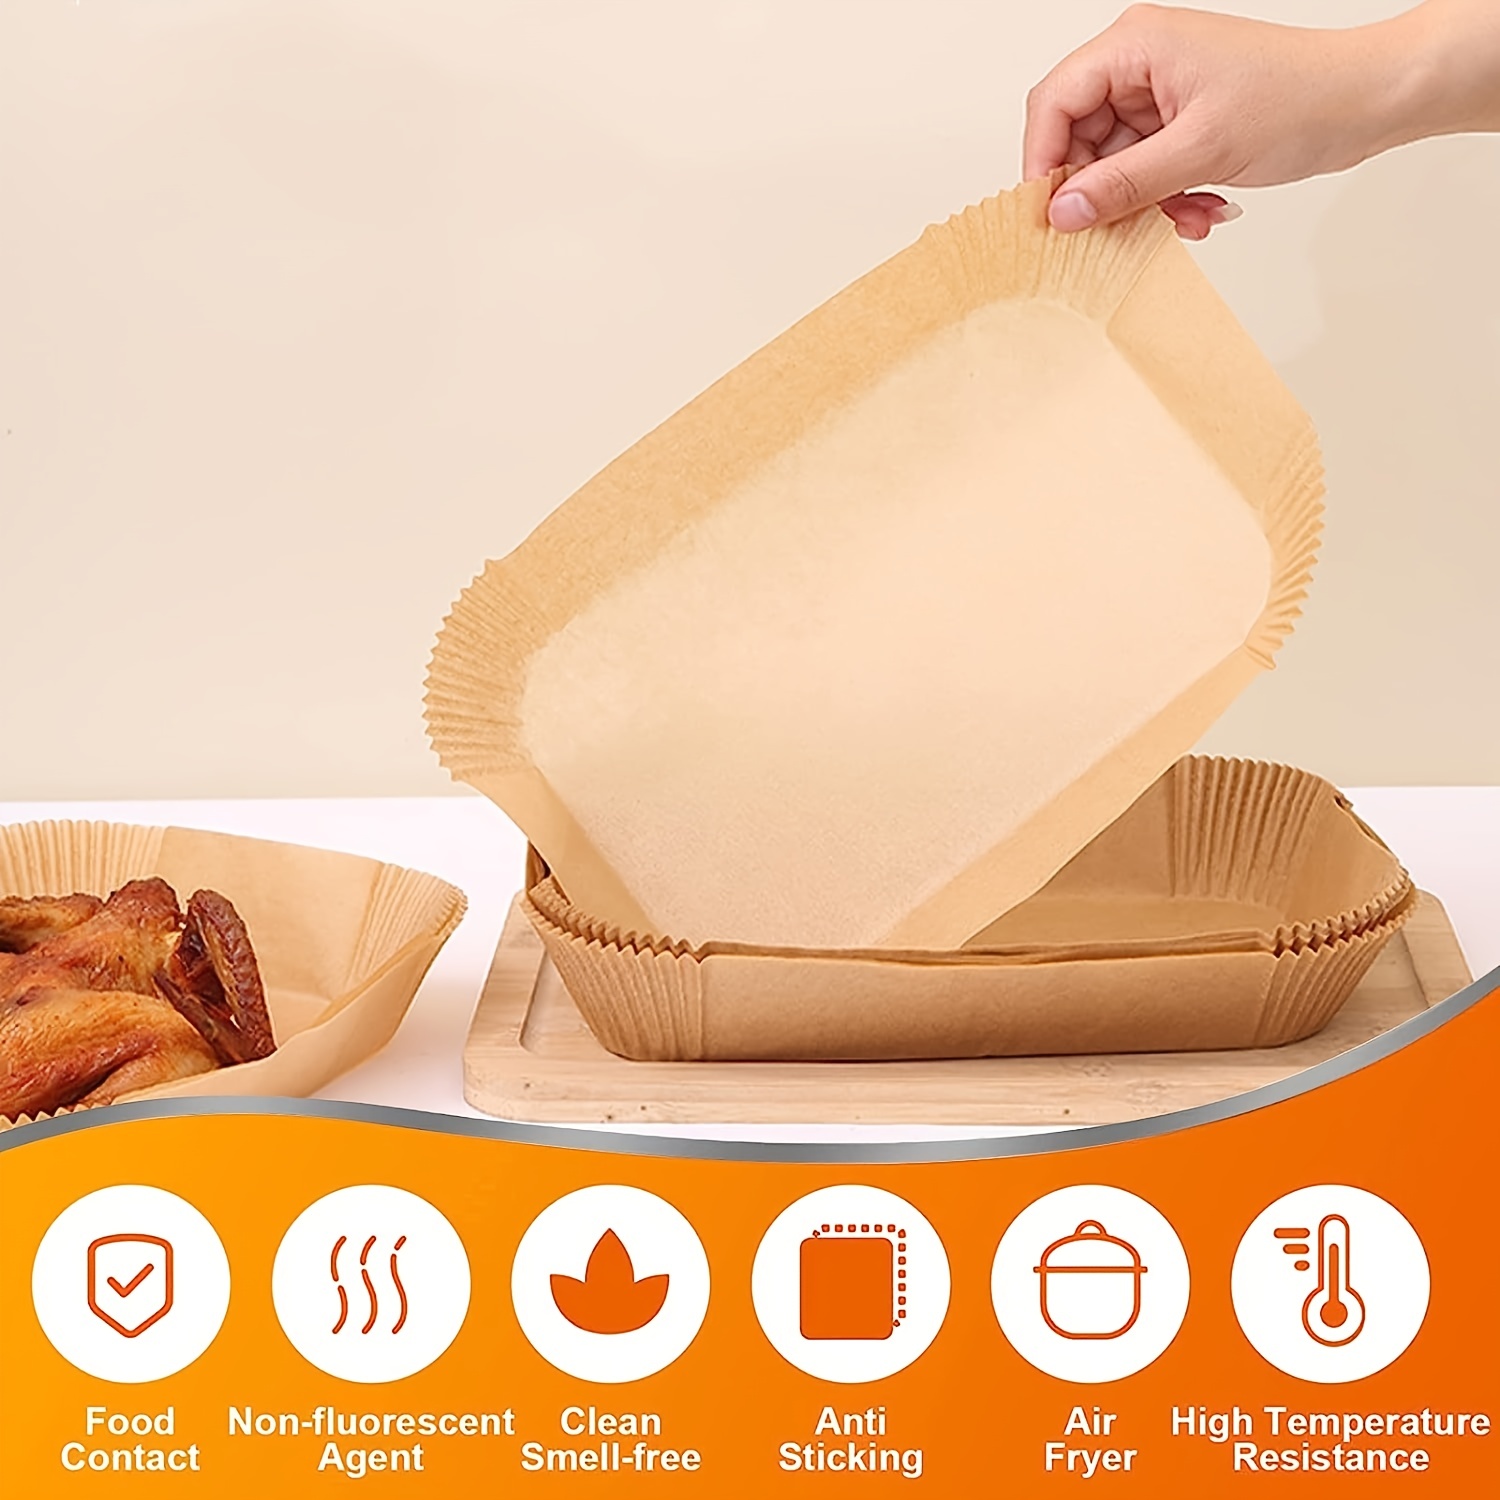 Air Fryer Round Paper Liners Disposable Large For 5 To 8 Qt - Temu